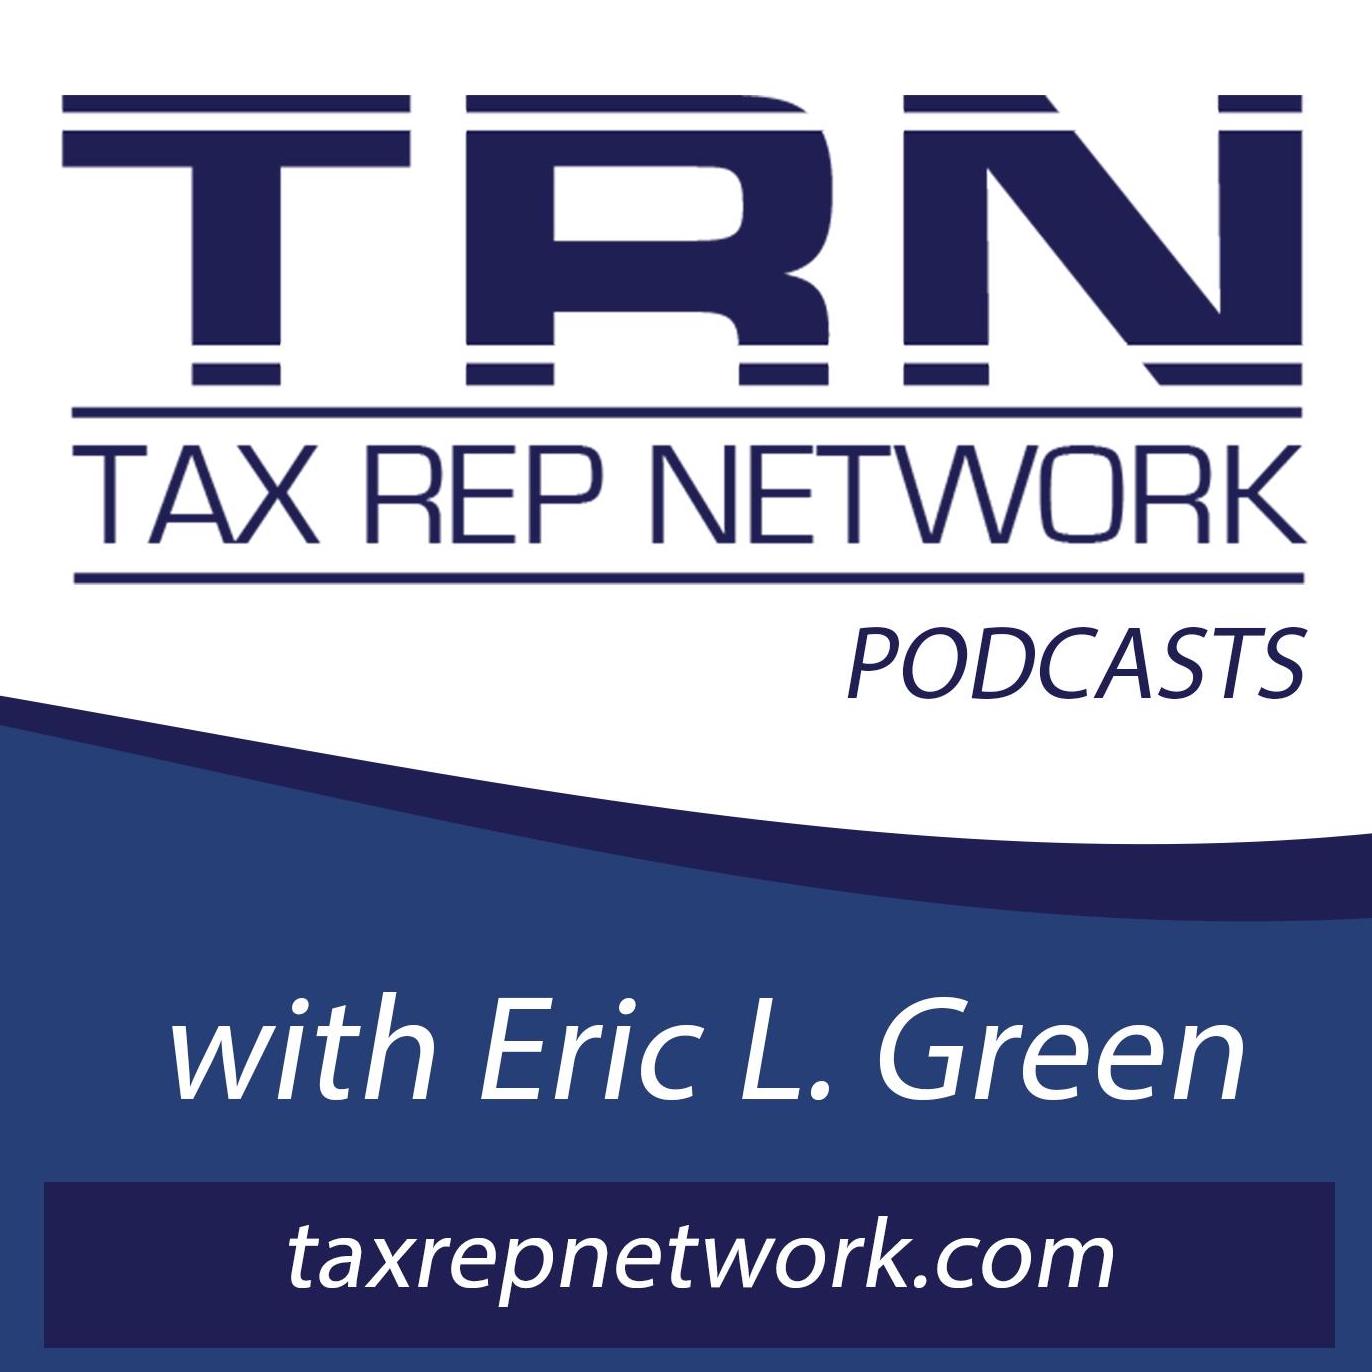 Sagemont Tax and Willis Towers Watson (WTW) Discuss ERC Enforcement on the Tax Rep LLC Network Podcast